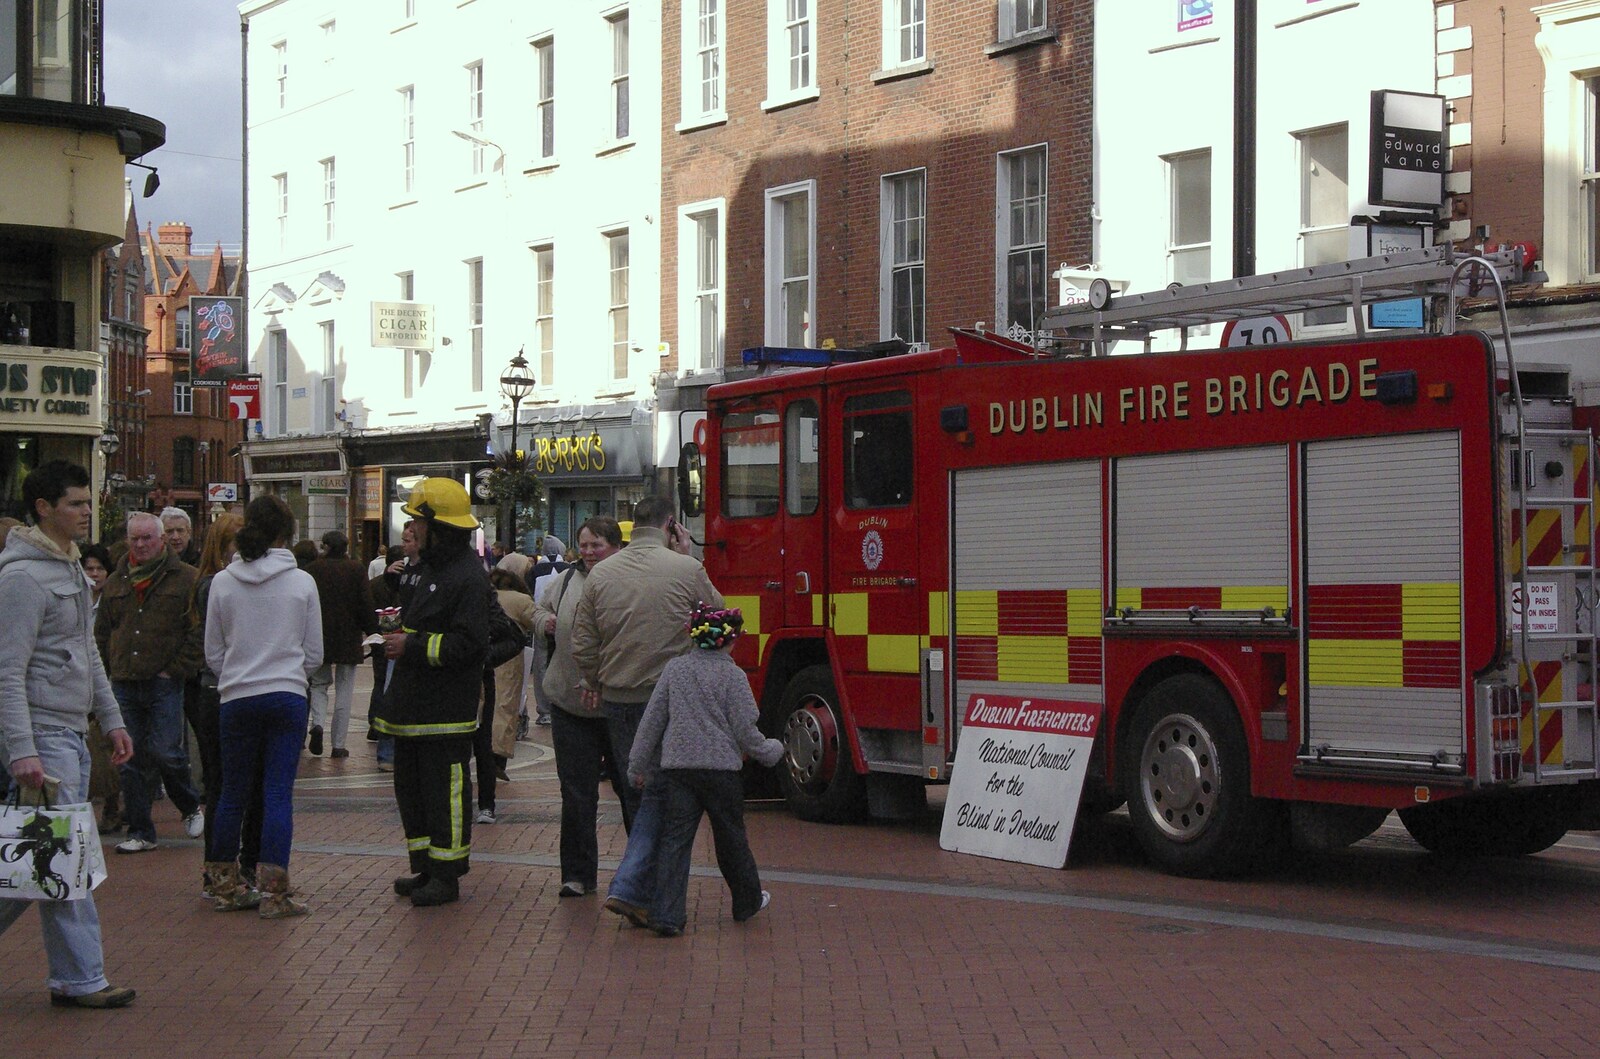 A fire engine does fund-raising on Grafton Street from Easter in Dublin, Ireland - 21st March 2008